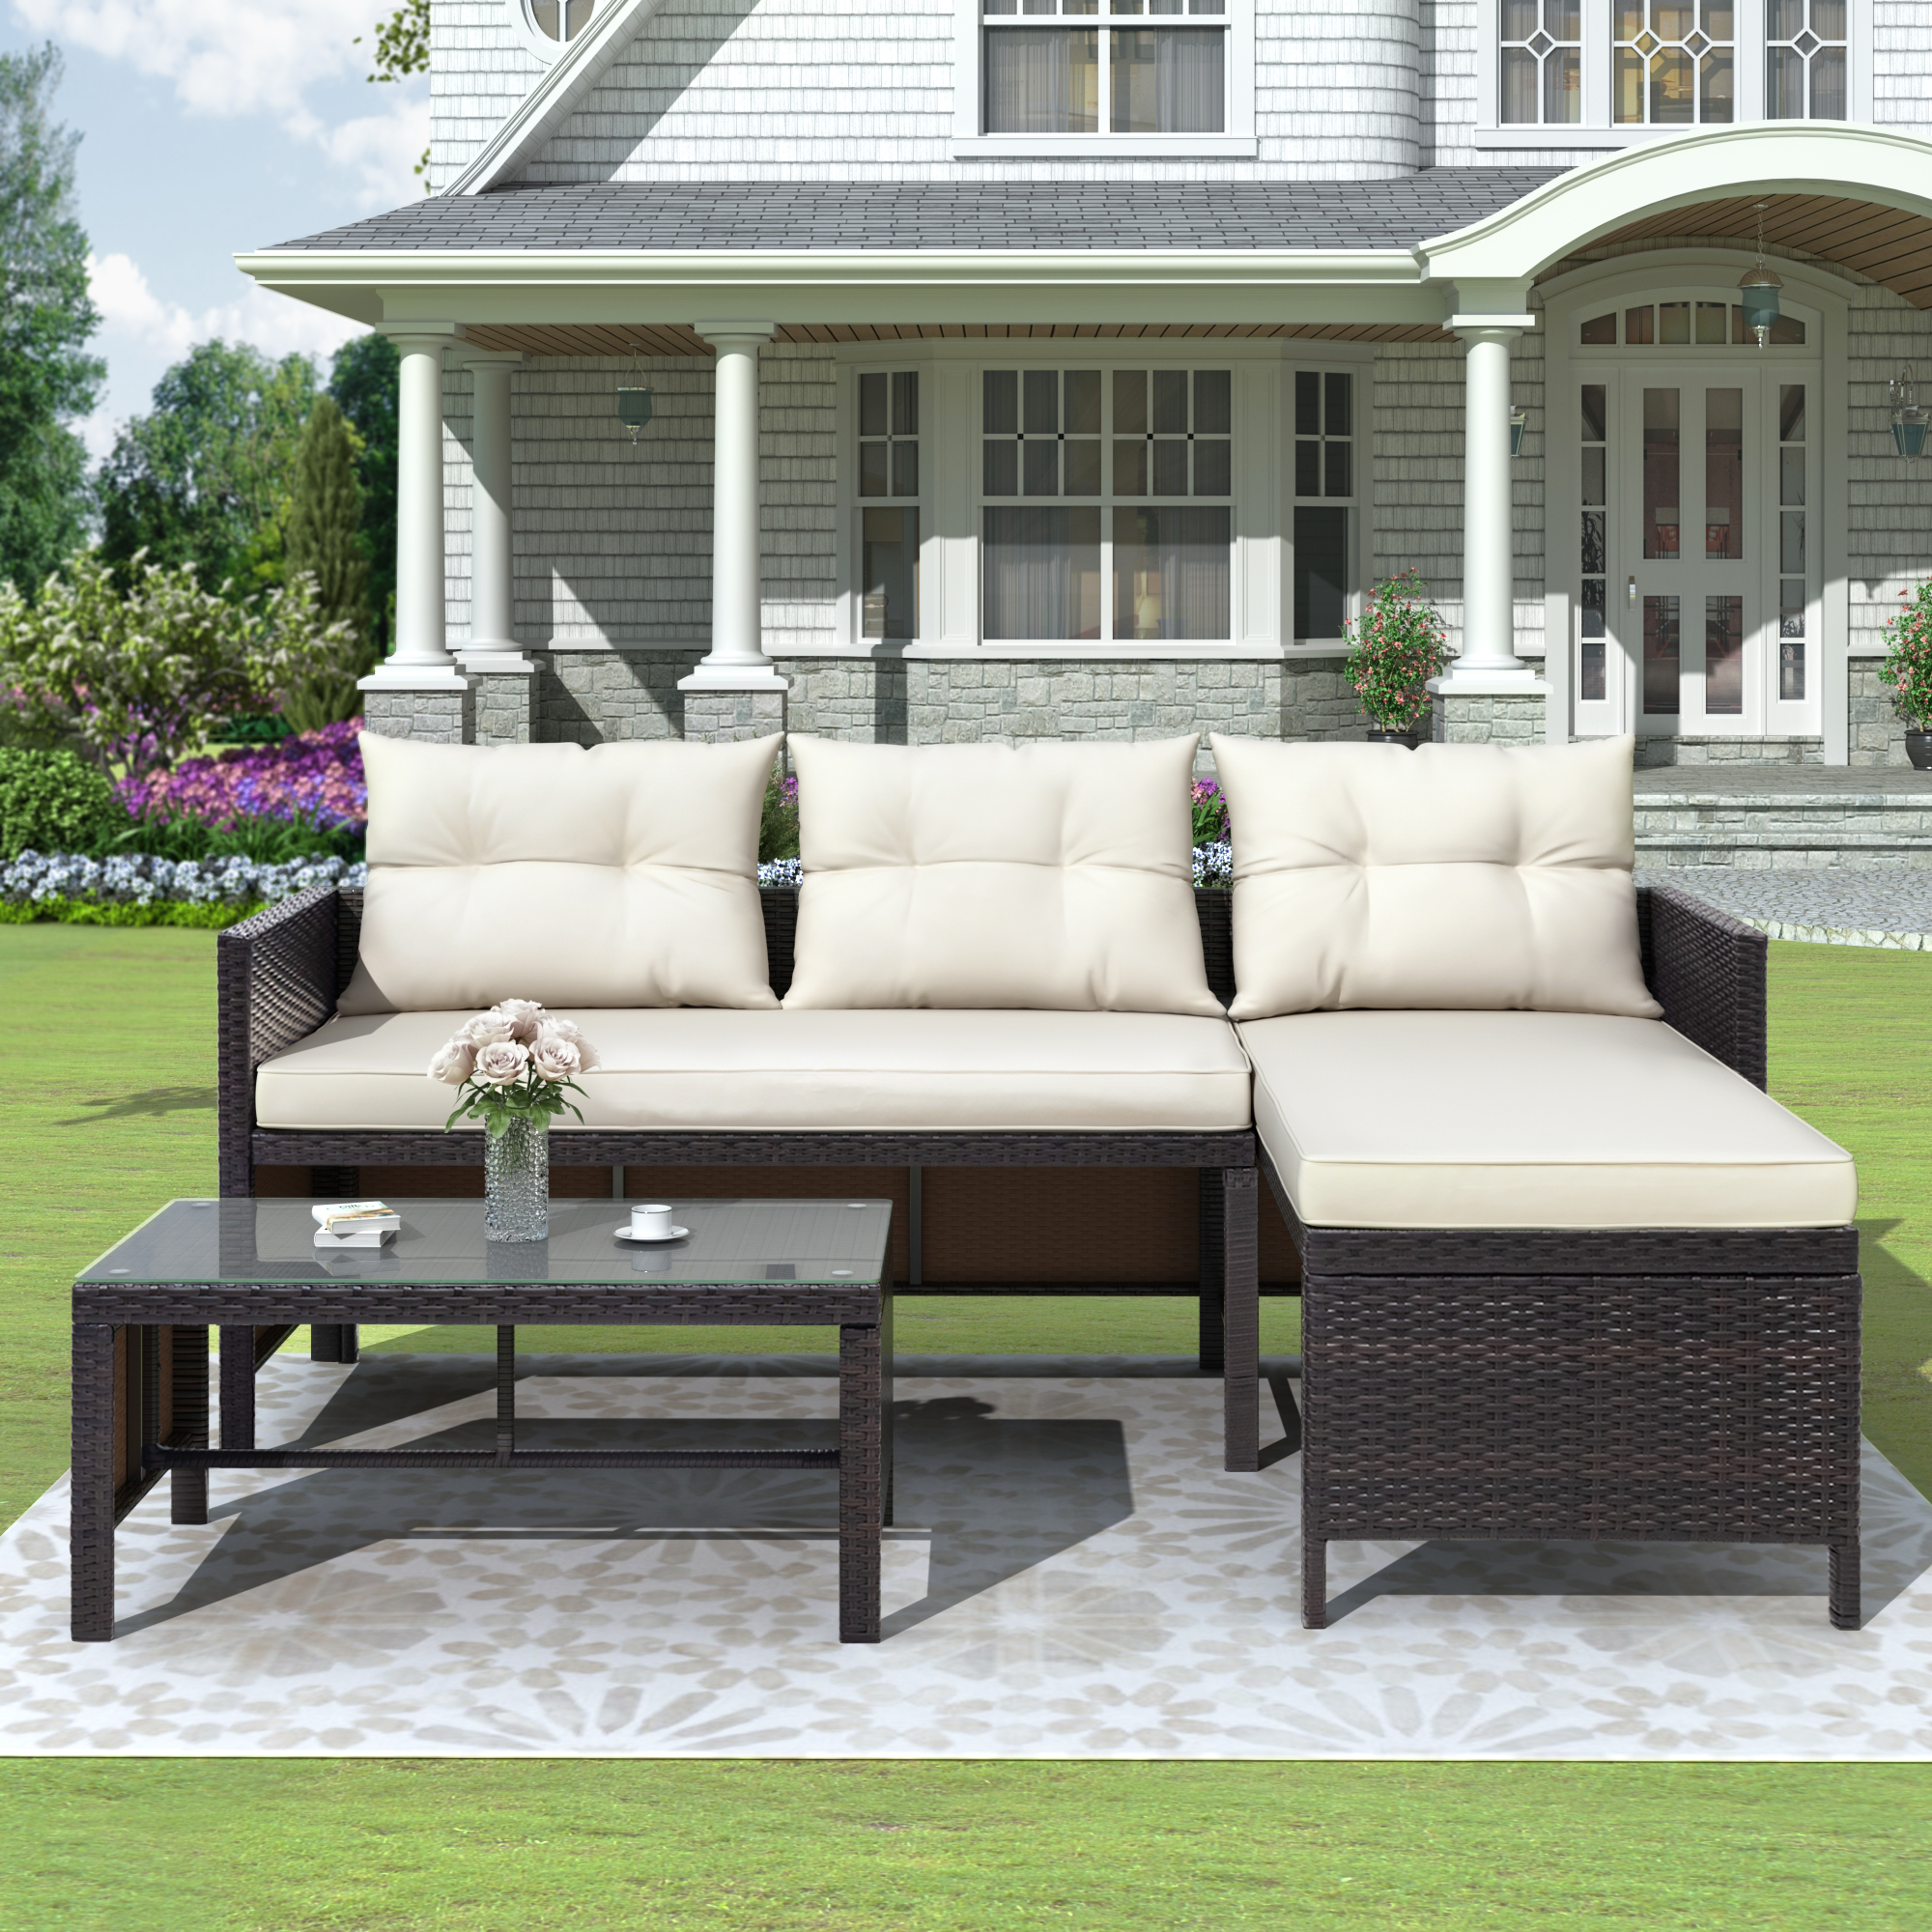 Wicker Sectional Sofa Set, 3 Pieces Patio Furniture Sets with Coffee Table, Two Seat Sofa & Chaise Lounge Chair, Outdoor PE Rattan Conversation Bistro Set, Patio Seating Couch Set, Brown, J647 - image 1 of 14